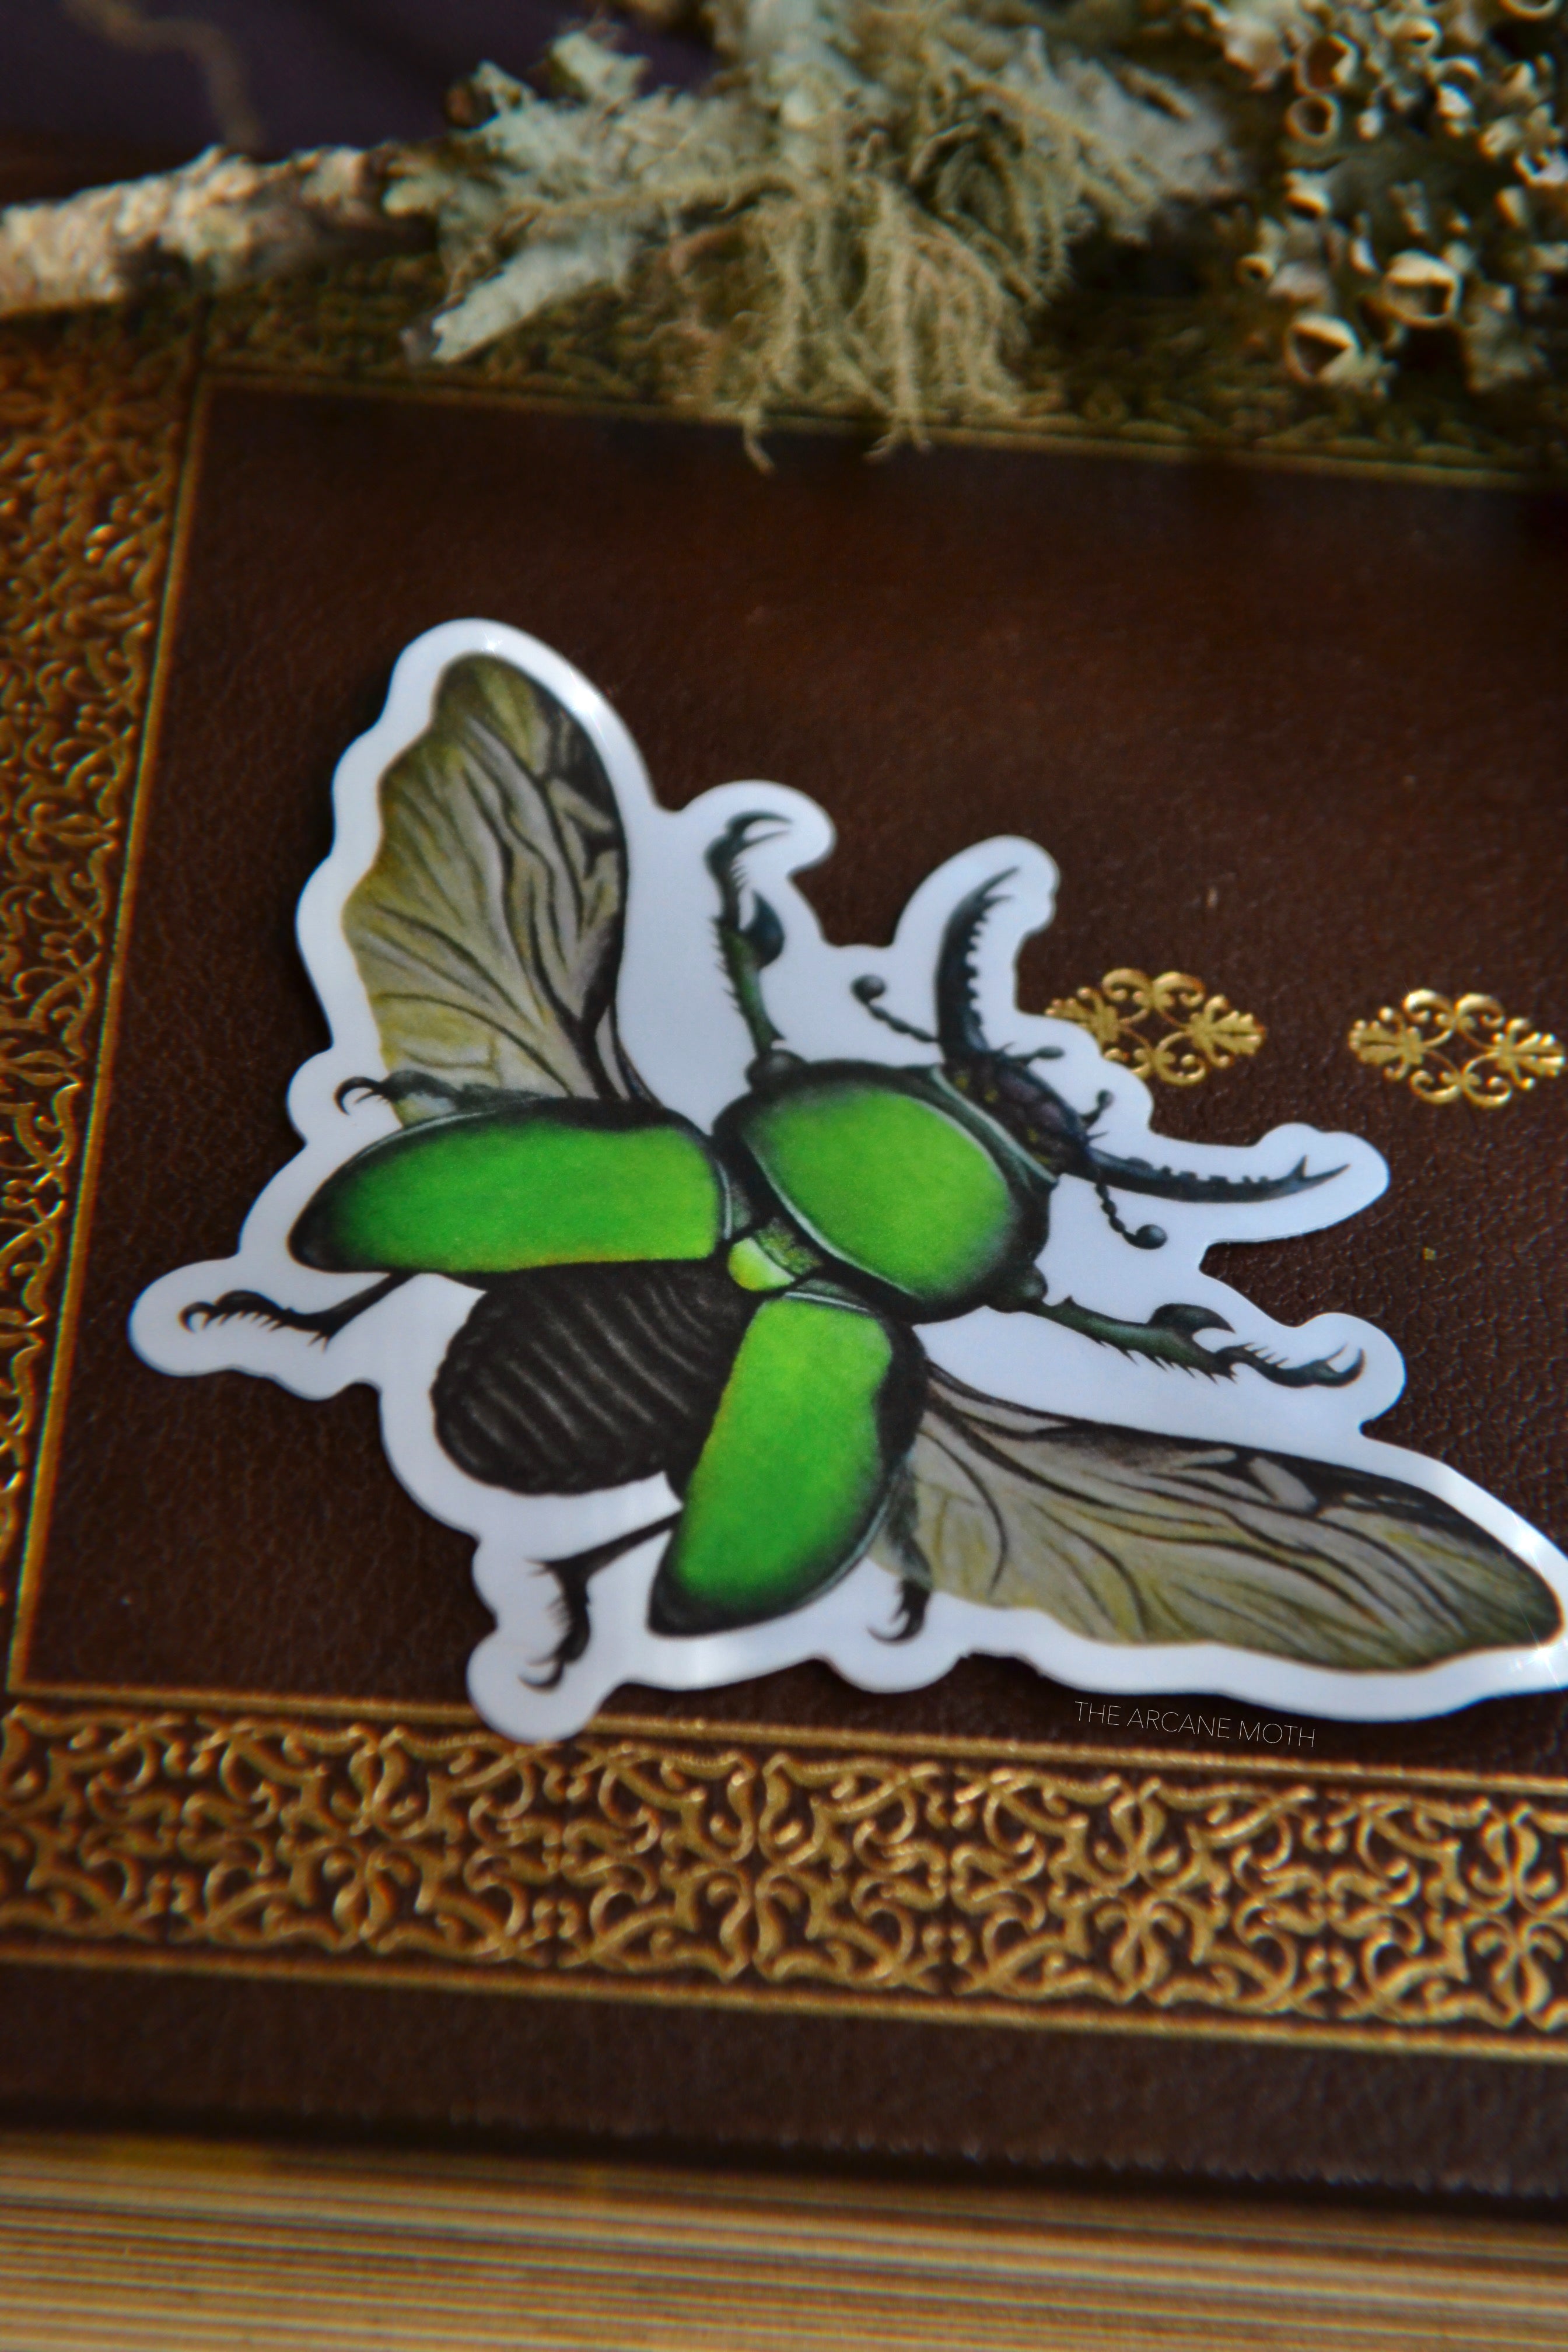 Stag Beetle Sticker